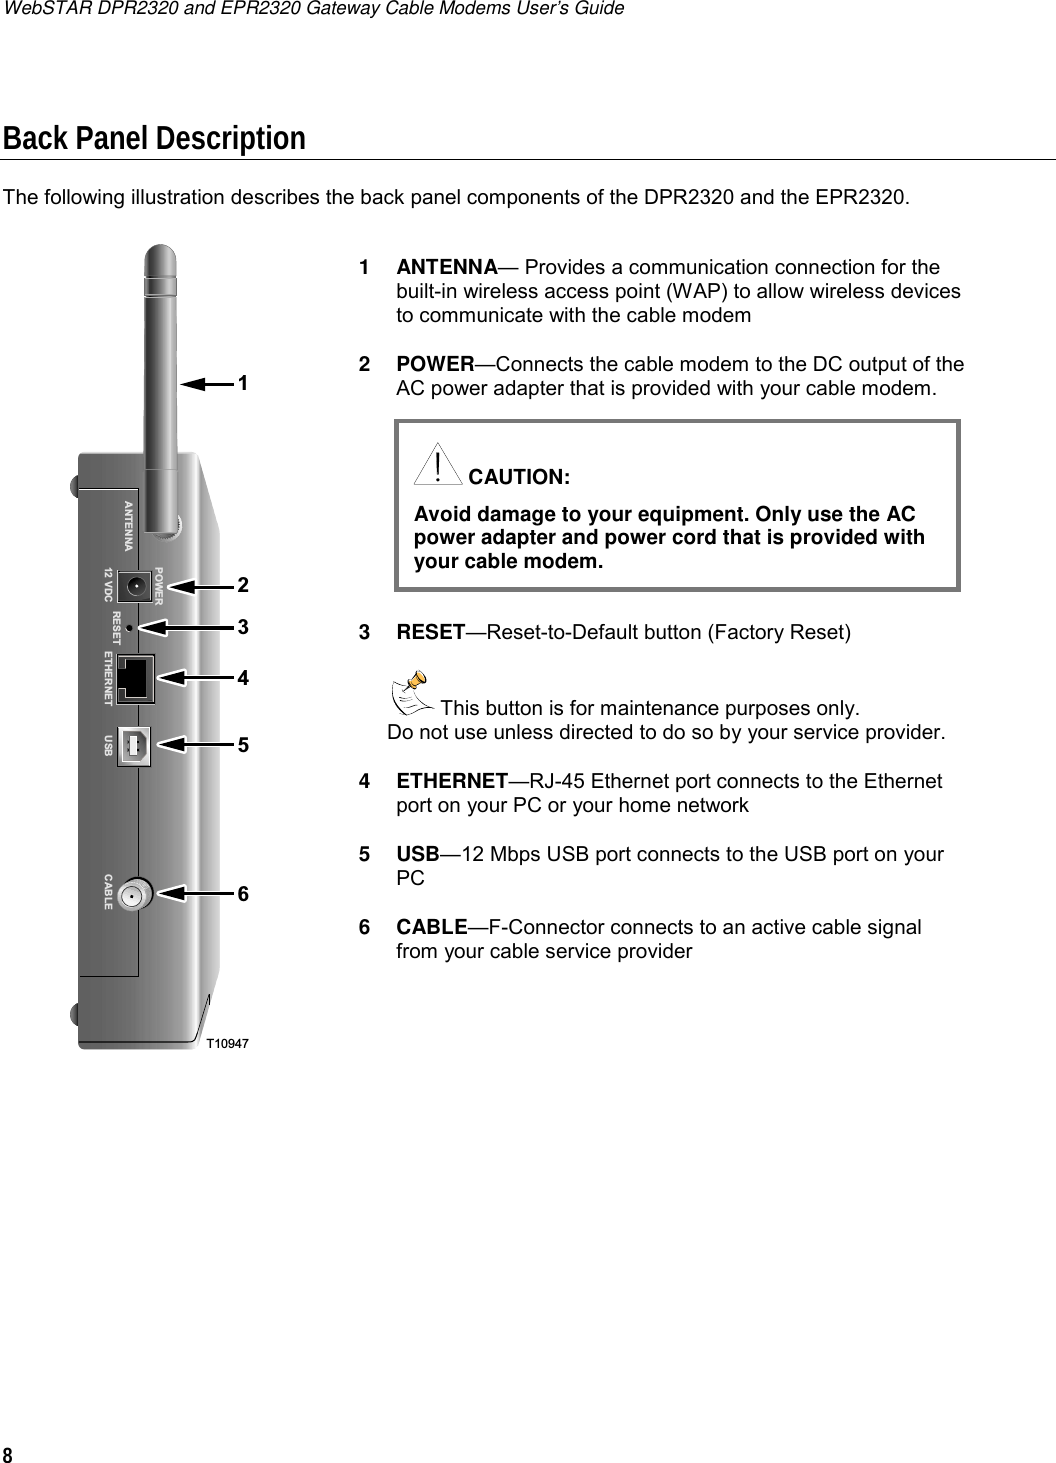 WebSTAR DPR2320 and EPR2320 Gateway Cable Modems User’s Guide 8  Back Panel Description The following illustration describes the back panel components of the DPR2320 and the EPR2320.   T1094721456POWERANTENNA12 VDC RESET ETHERNET CABLEUSB3  1 ANTENNA— Provides a communication connection for the built-in wireless access point (WAP) to allow wireless devices to communicate with the cable modem 2 POWER—Connects the cable modem to the DC output of the AC power adapter that is provided with your cable modem.      3 RESET—Reset-to-Default button (Factory Reset)   This button is for maintenance purposes only.  Do not use unless directed to do so by your service provider. 4 ETHERNET—RJ-45 Ethernet port connects to the Ethernet port on your PC or your home network 5 USB—12 Mbps USB port connects to the USB port on your PC 6 CABLE—F-Connector connects to an active cable signal from your cable service provider     CAUTION: Avoid damage to your equipment. Only use the AC power adapter and power cord that is provided with your cable modem.  